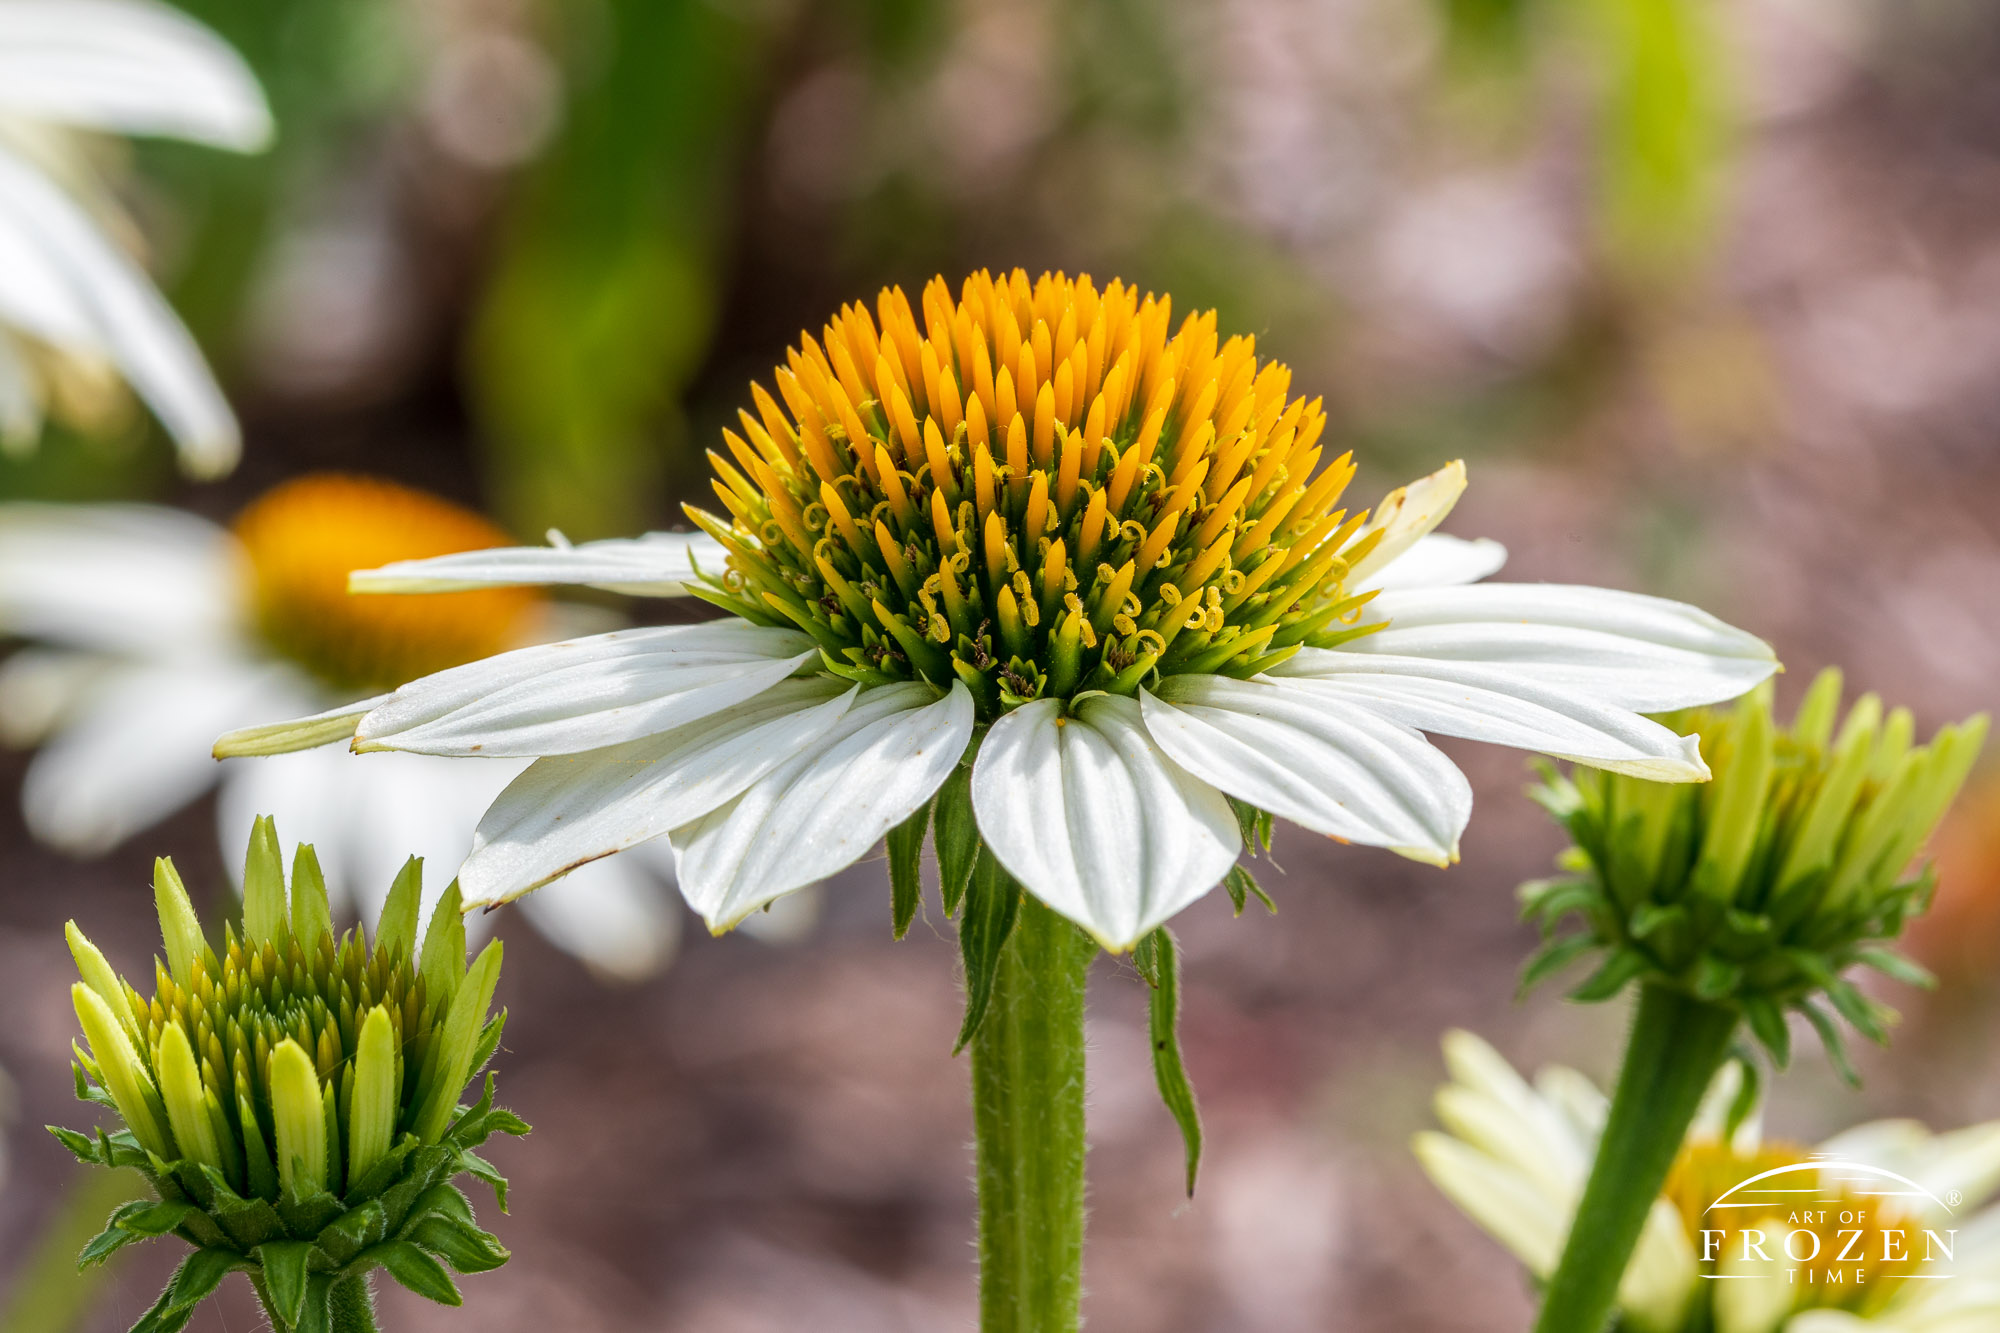 A close up of a white coneflower called White Swan where the petals are white and the seed head displays a yellow gold color.